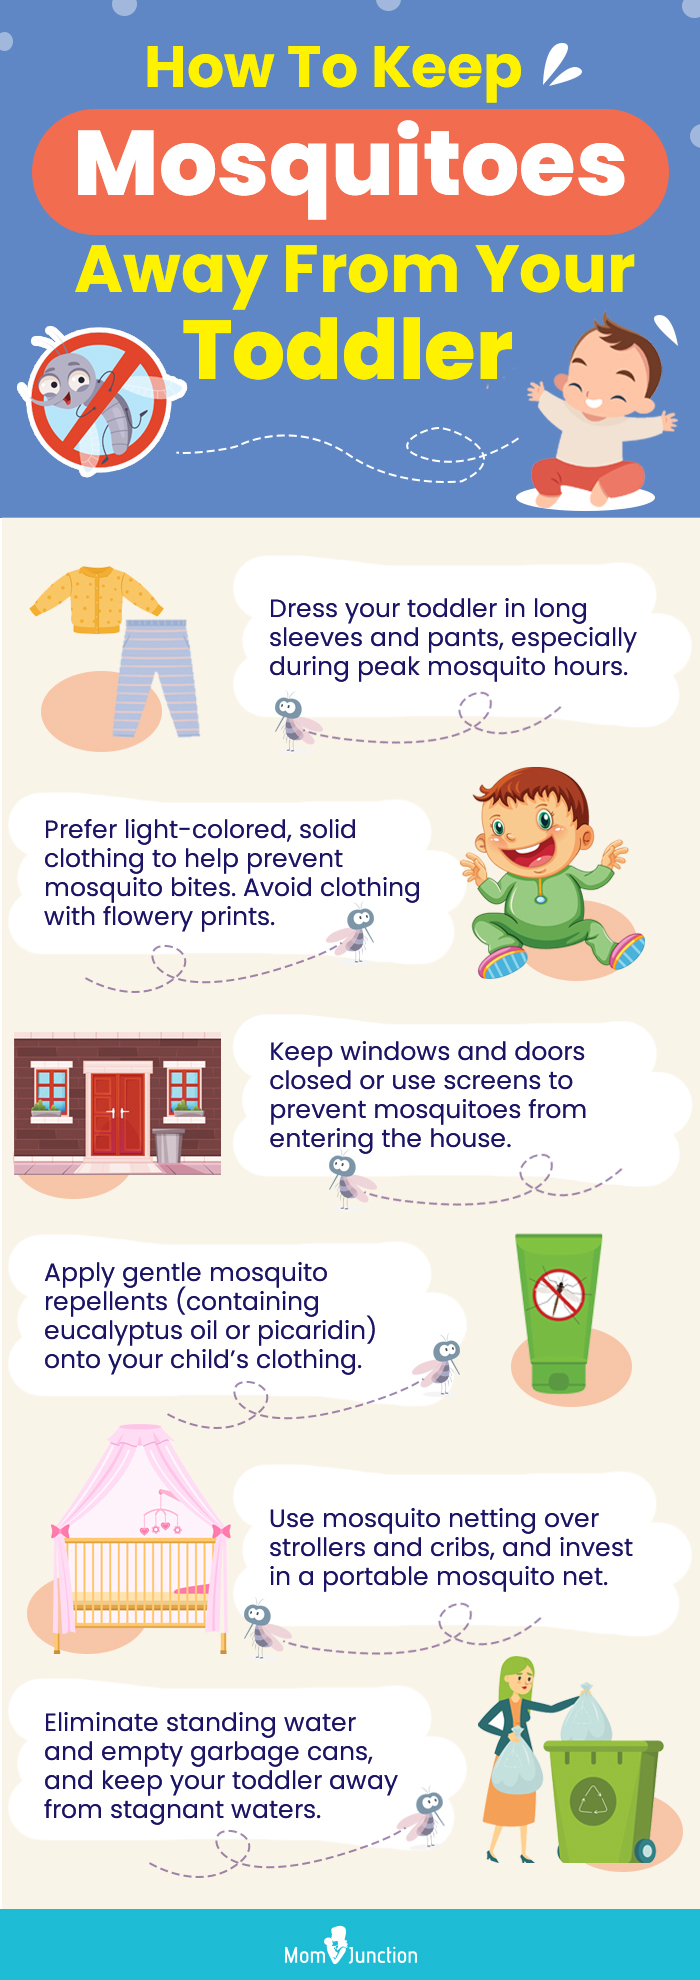 how to keep mosquitoes away from your toddler (infographic)